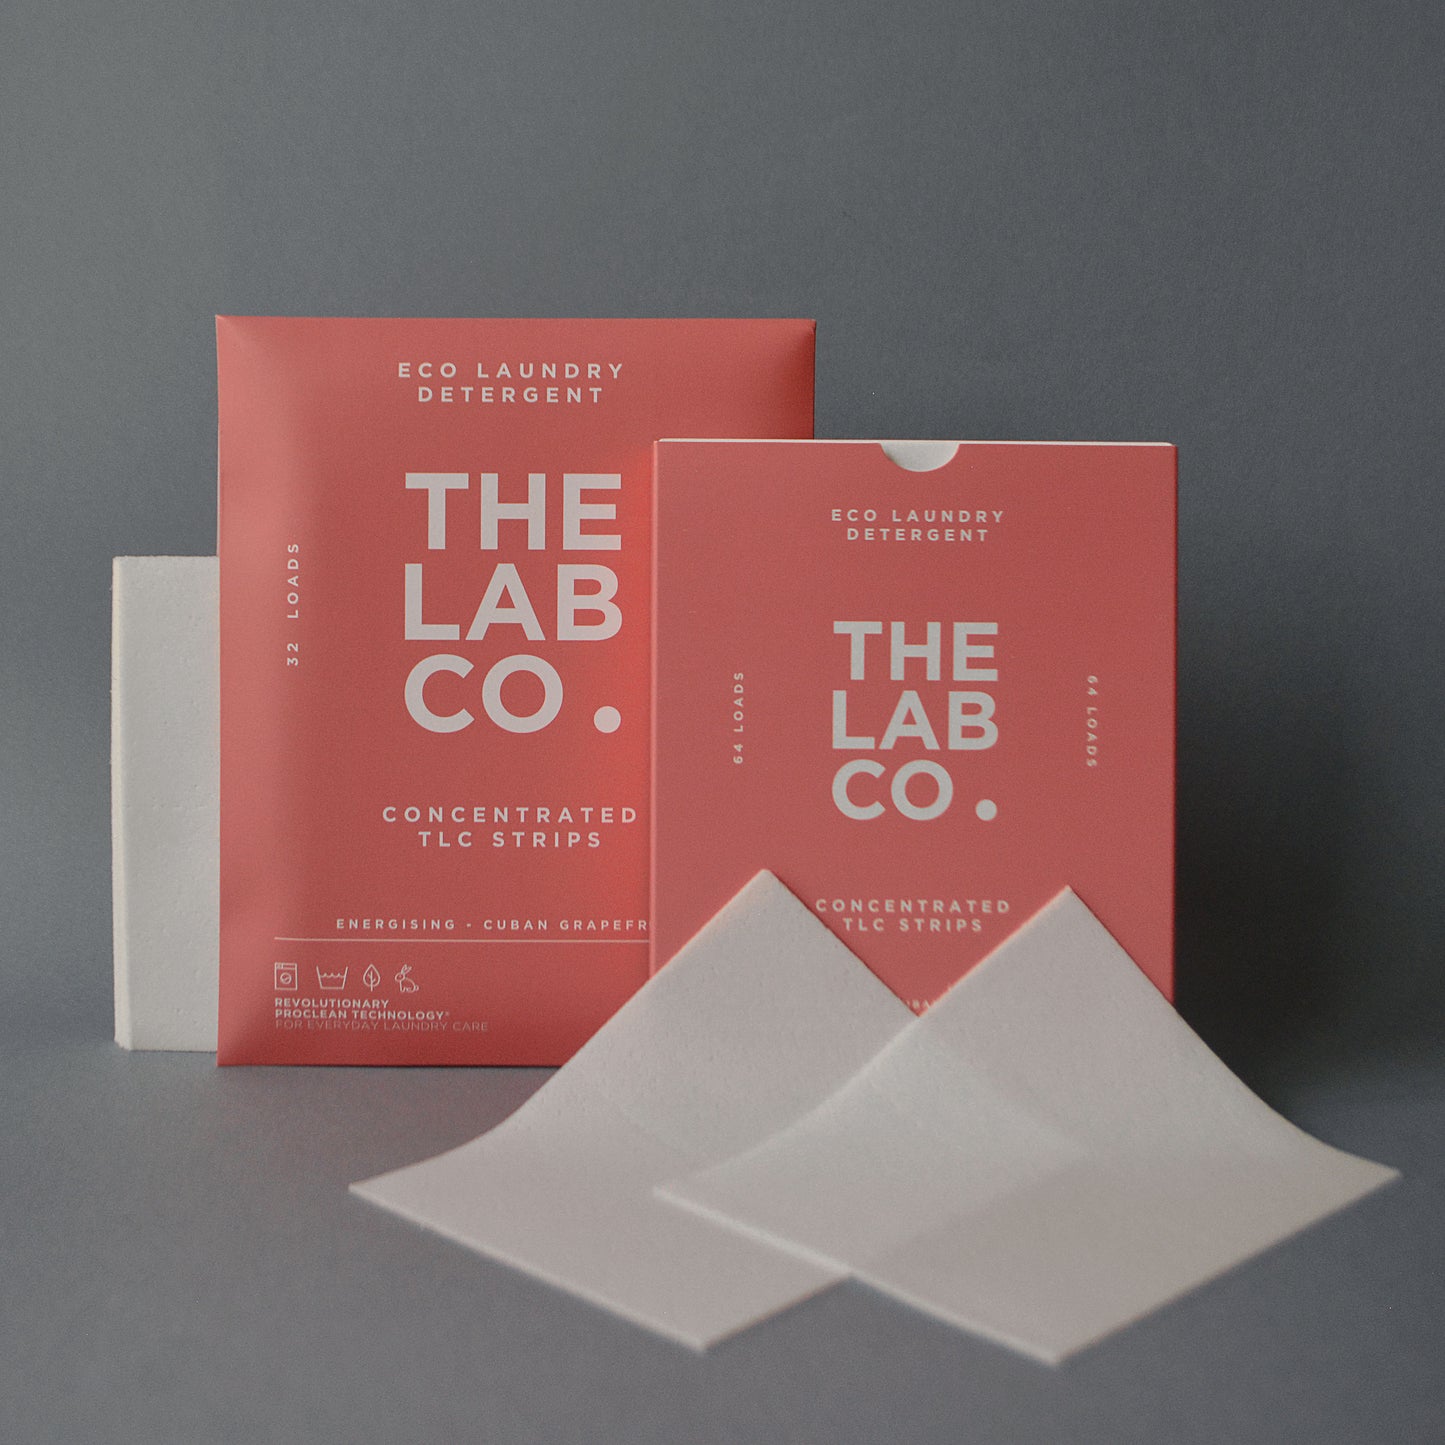 The Lab Co. | Concentrated TLC Strips | Energising